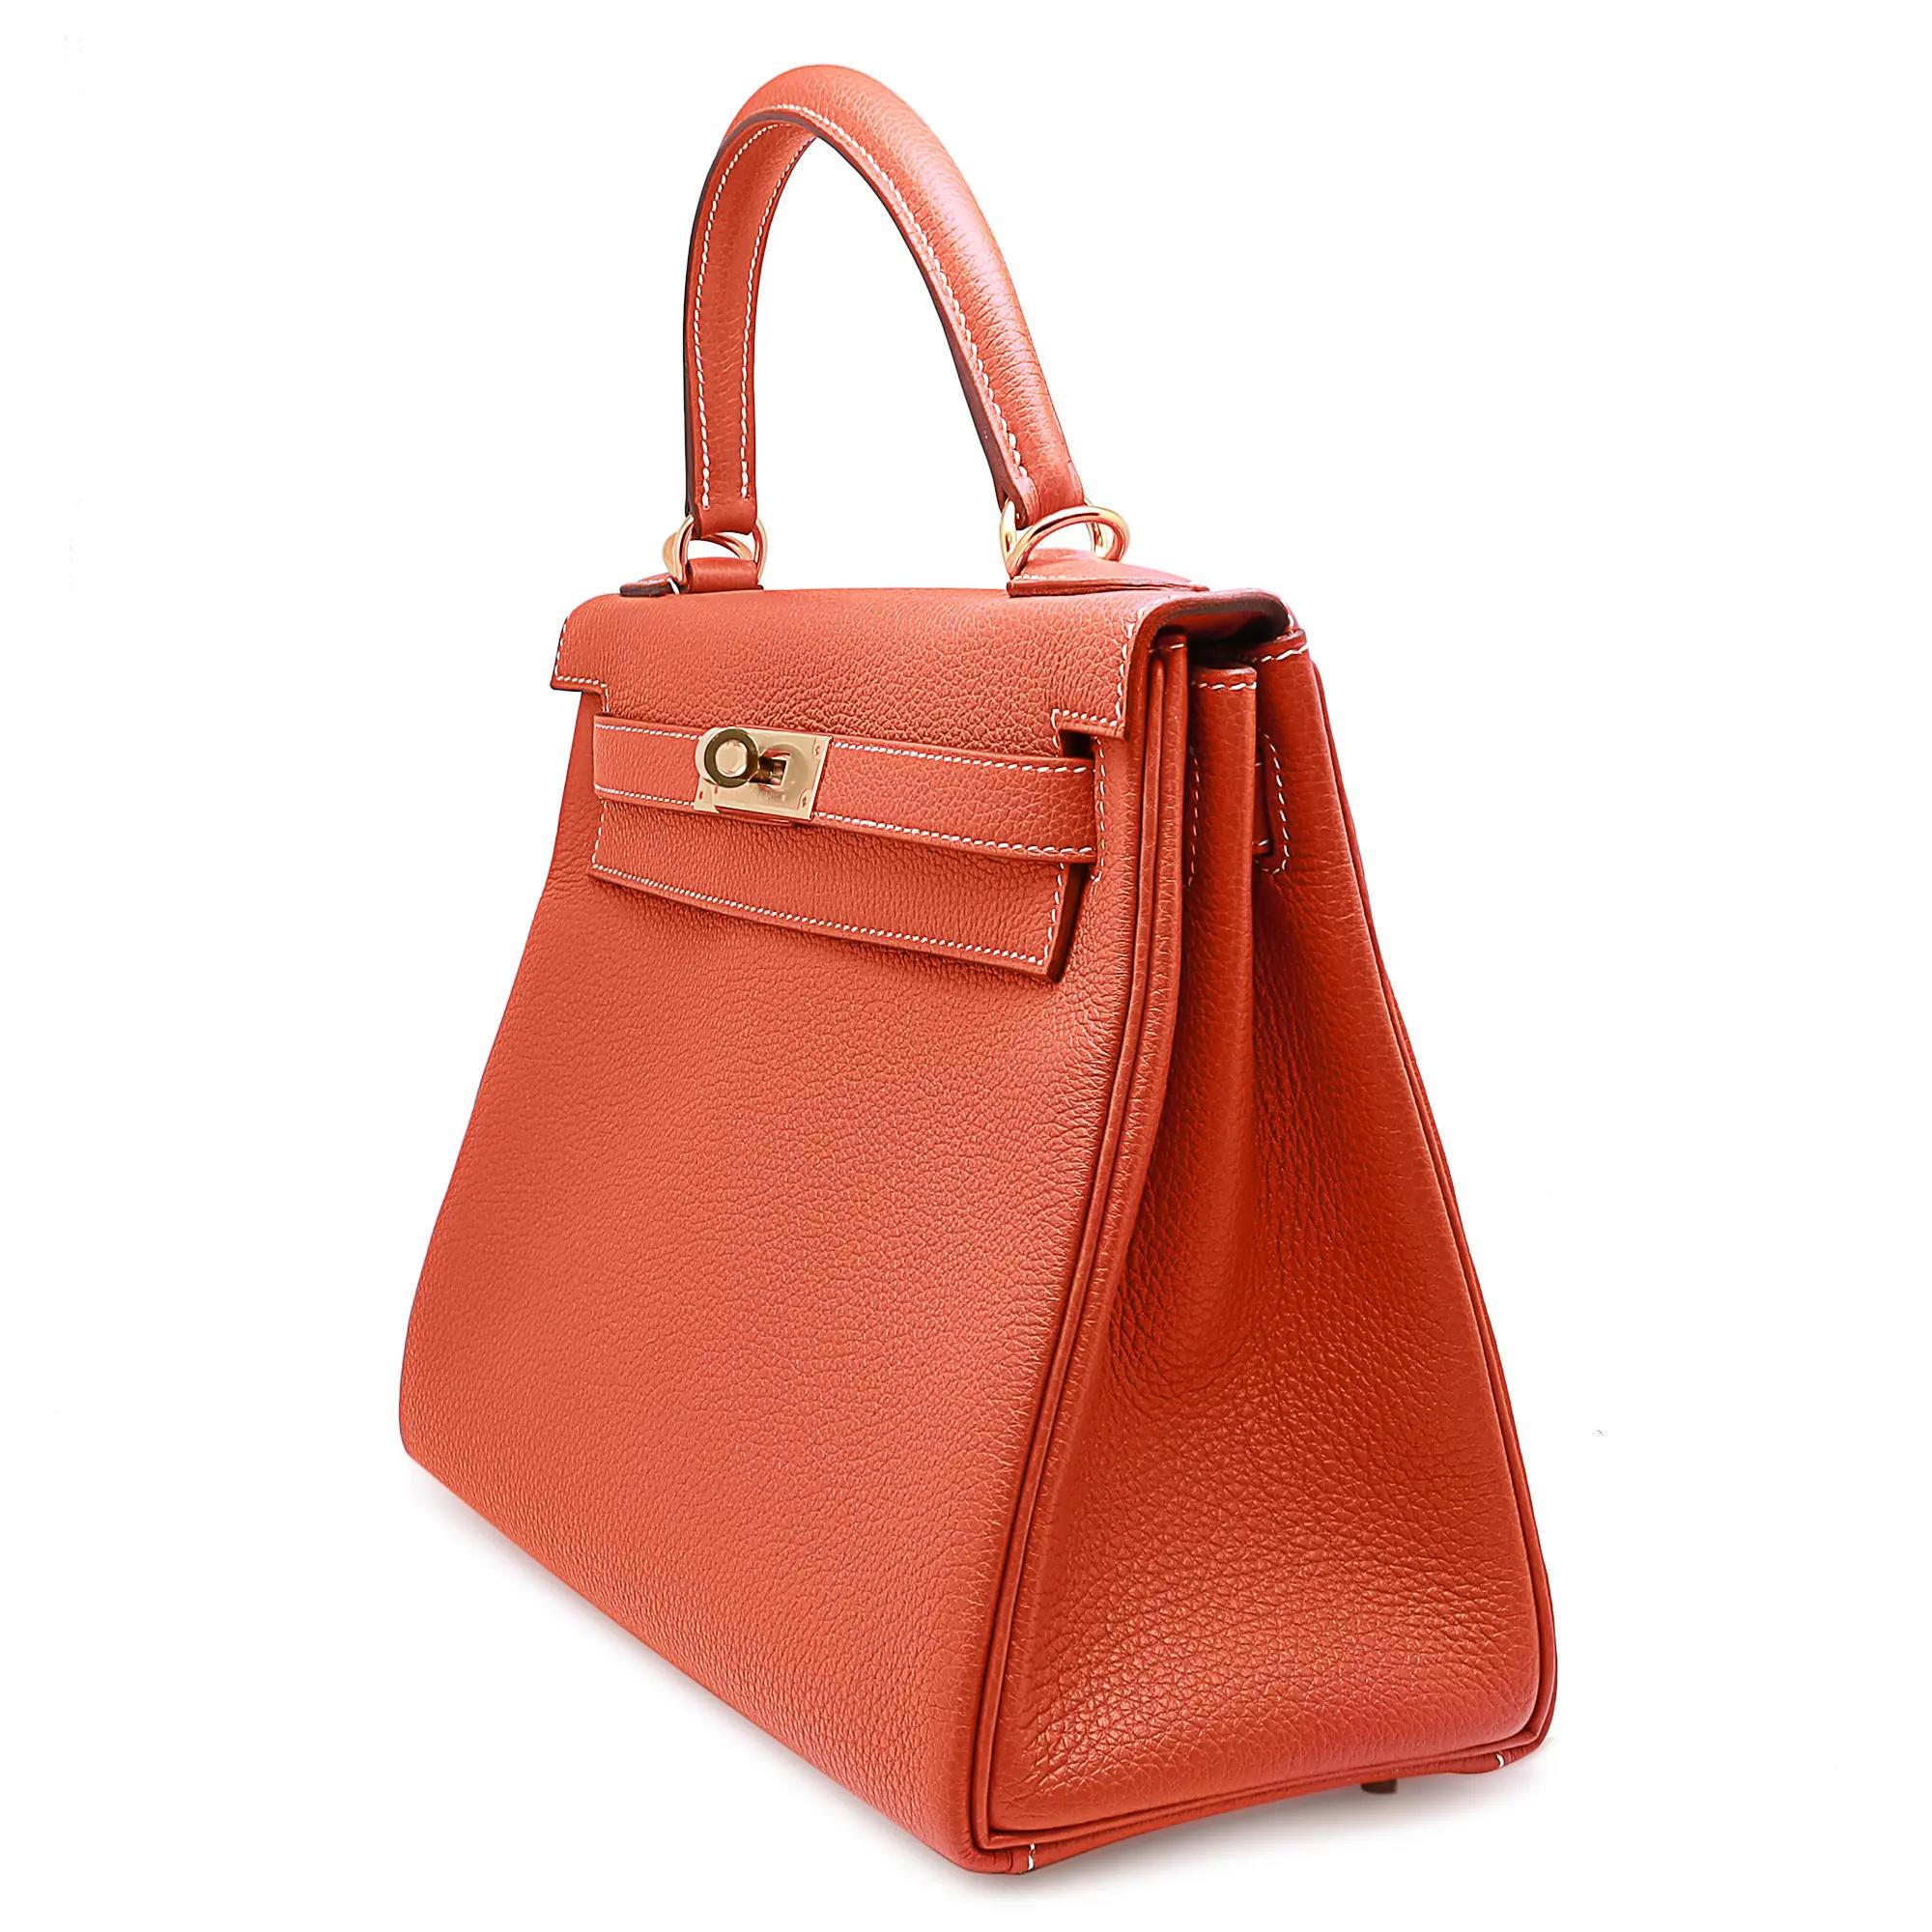 Hermes Kelly Retourne 28 Feu Togo Sanguine. This stunning Hermes classic handbag is beautifully crafted in stamped Togo calfskin leather in fire orange with white stitching. Come with a single rolled leather top handle with a detachable leather